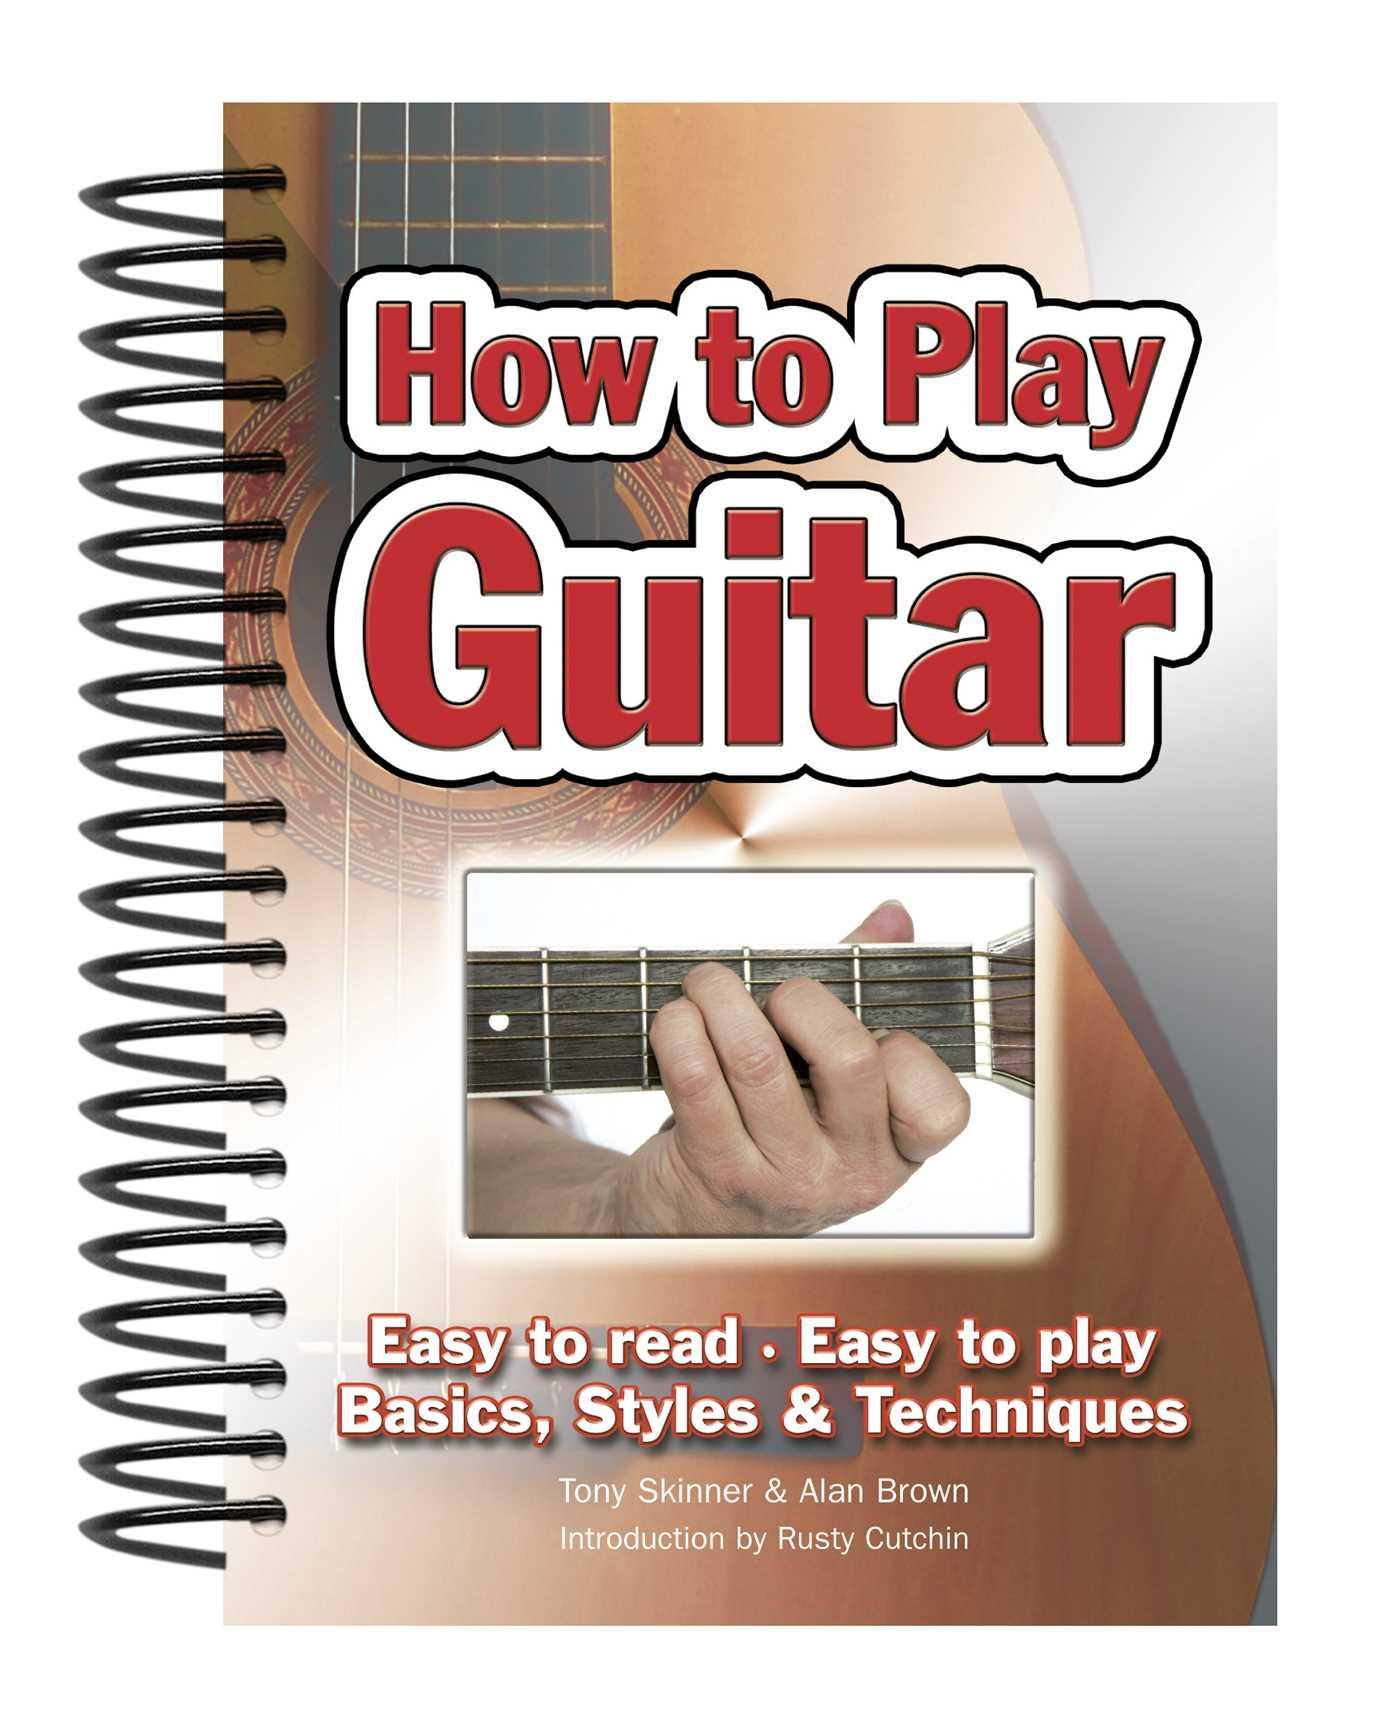 How To Play Guitar / Easy to Read, Easy to Play; Basics, Styles & Techniques / Taschenbuch / Buch / Englisch / 2010 / Flame Tree Publishing / EAN 9781847867018